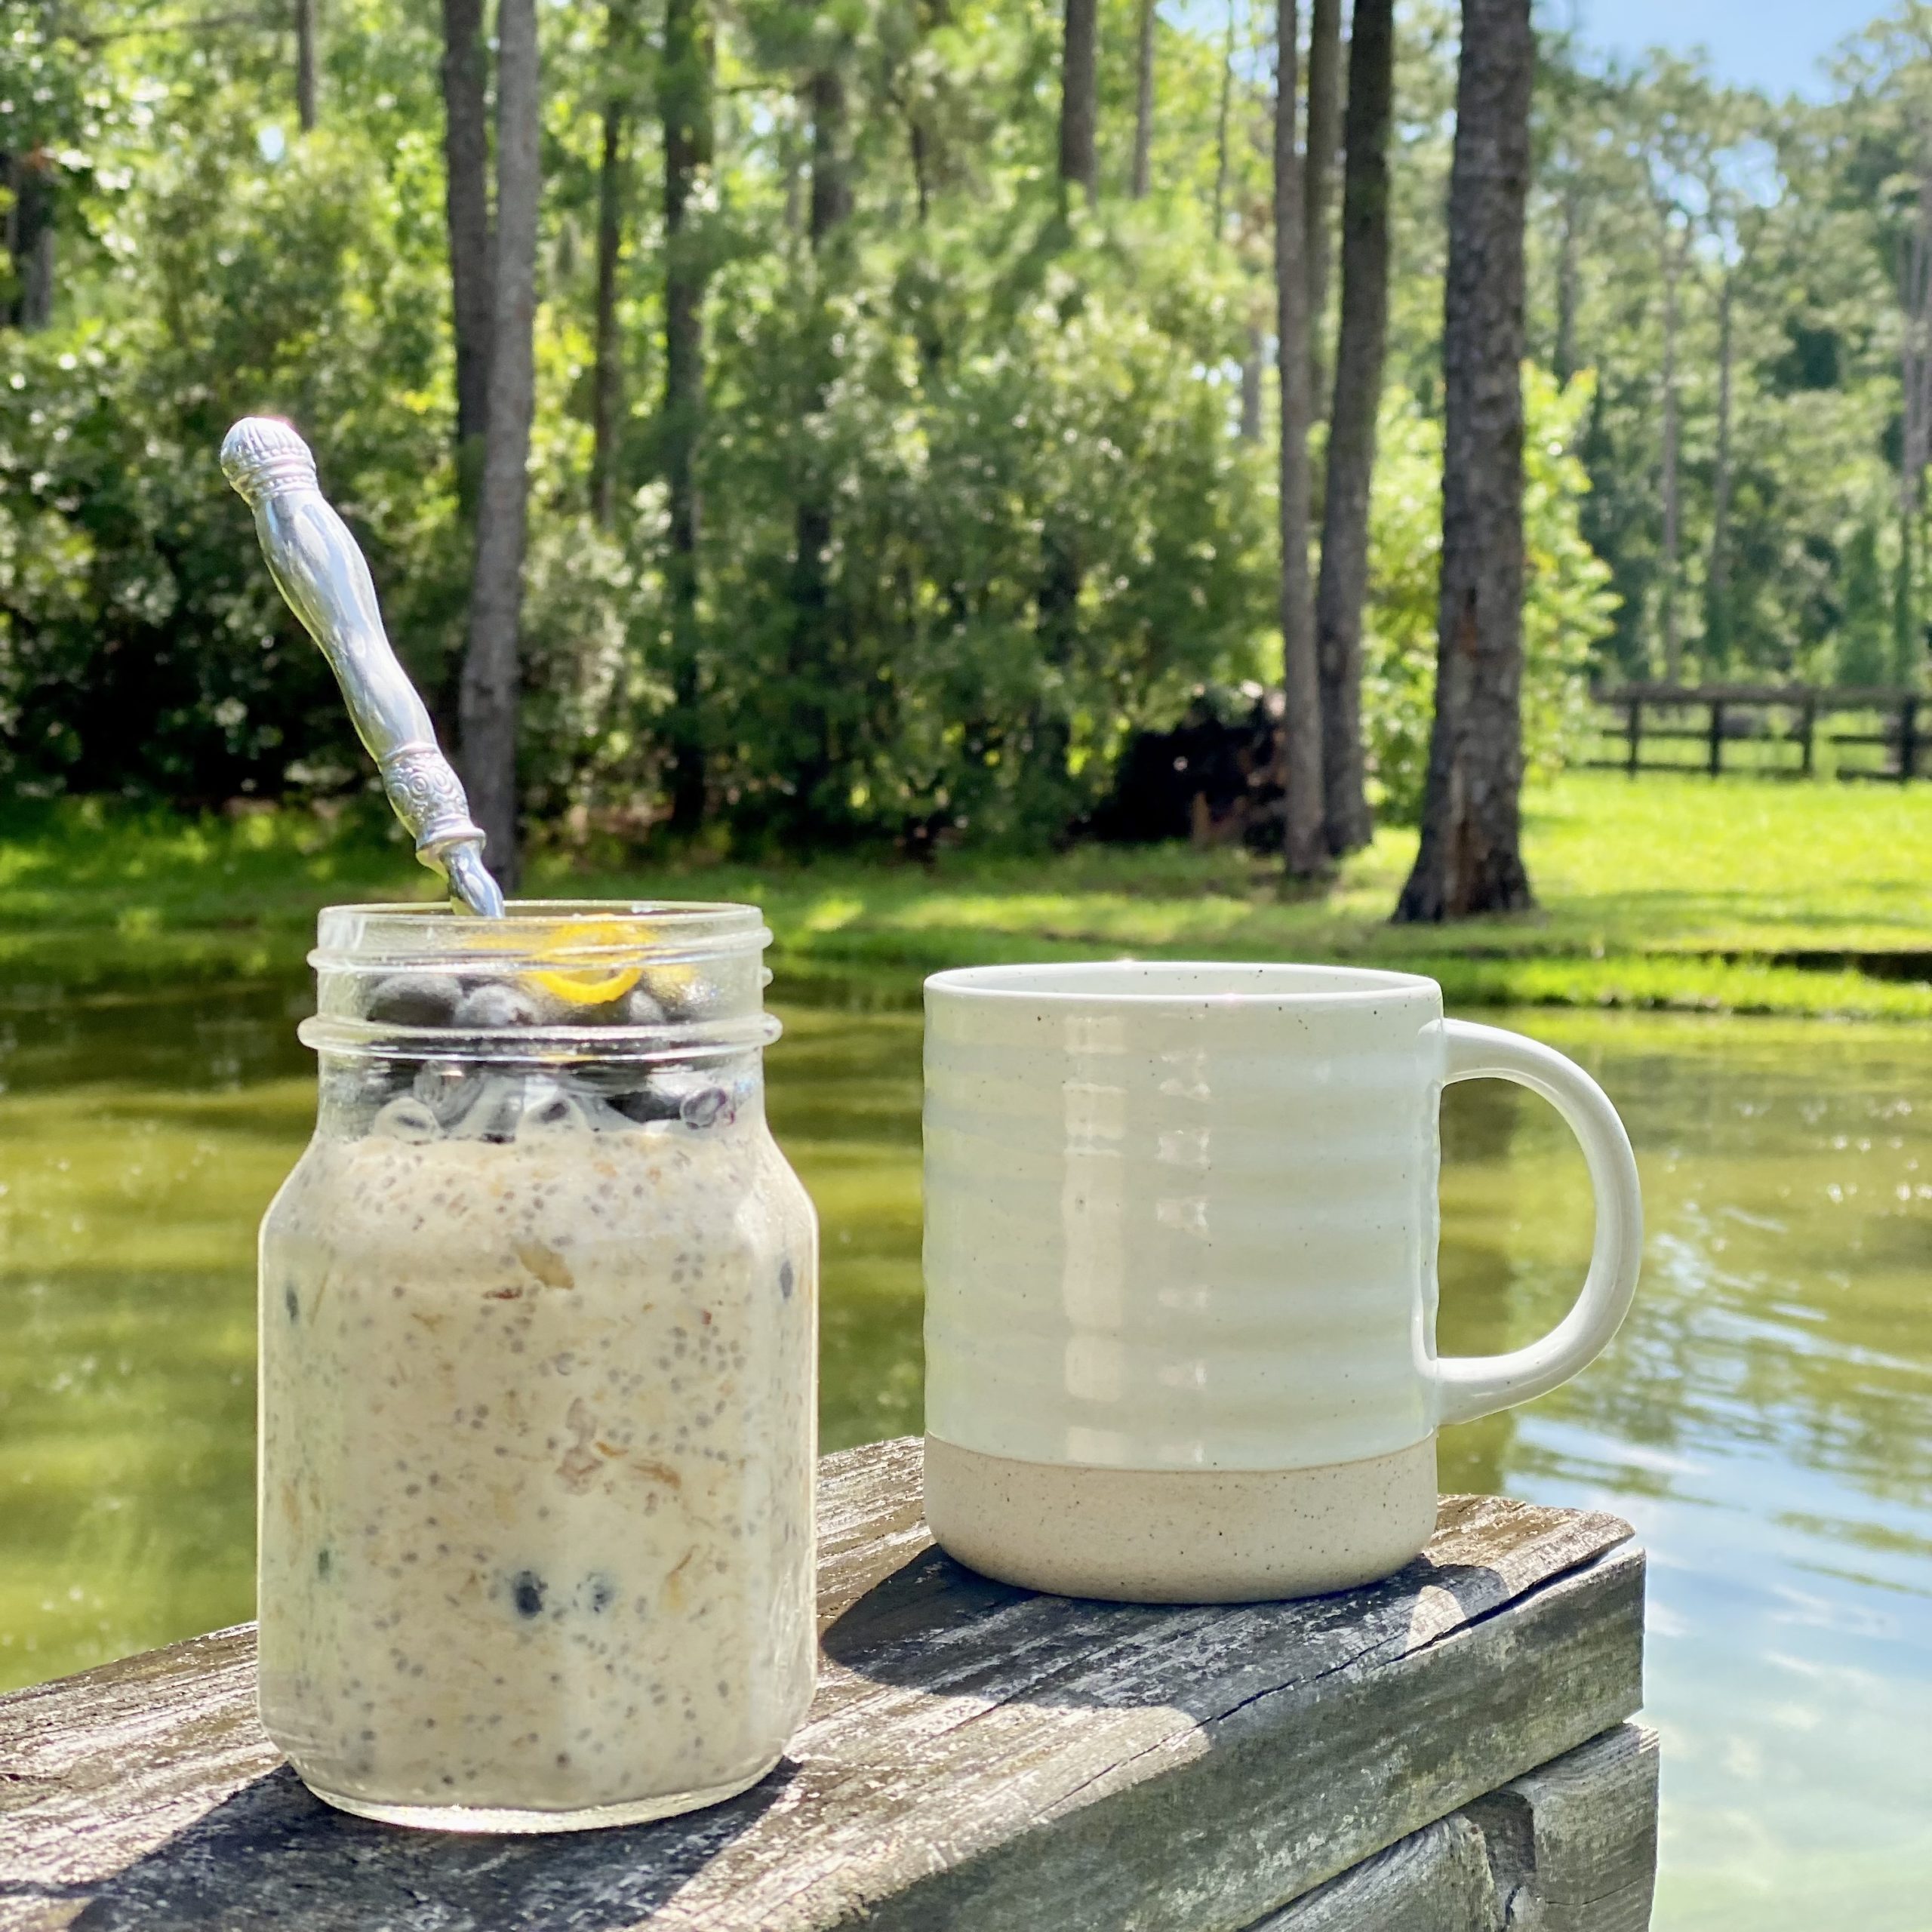 Overnight oats in a jar with a spoon in it and a coffee cup behind it next to the pond.